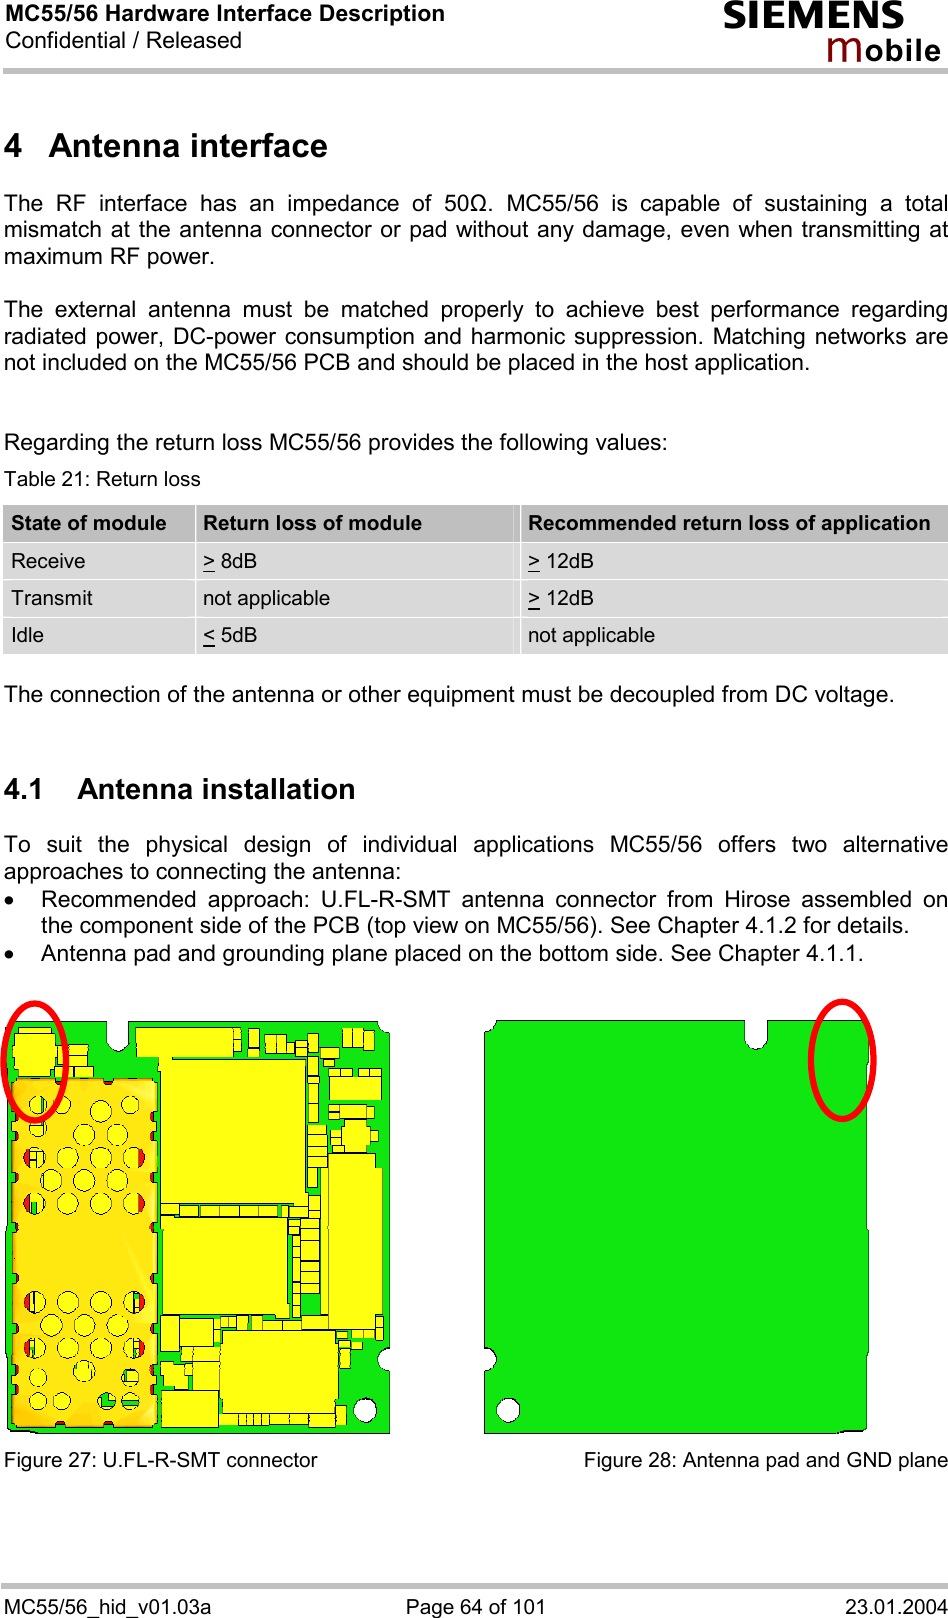 MC55/56 Hardware Interface Description Confidential / Released s mo b i l e MC55/56_hid_v01.03a  Page 64 of 101  23.01.2004 4 Antenna interface The RF interface has an impedance of 50&quot;. MC55/56 is capable of sustaining a total mismatch at the antenna connector or pad without any damage, even when transmitting at maximum RF power.   The external antenna must be matched properly to achieve best performance regarding radiated power, DC-power consumption and harmonic suppression. Matching networks are not included on the MC55/56 PCB and should be placed in the host application.    Regarding the return loss MC55/56 provides the following values: Table 21: Return loss State of module  Return loss of module  Recommended return loss of application Receive  &gt; 8dB  &gt; 12dB  Transmit   not applicable   &gt; 12dB  Idle  &lt; 5dB   not applicable  The connection of the antenna or other equipment must be decoupled from DC voltage.  4.1 Antenna installation To suit the physical design of individual applications MC55/56 offers two alternative approaches to connecting the antenna:  ·  Recommended approach: U.FL-R-SMT antenna connector from Hirose assembled on the component side of the PCB (top view on MC55/56). See Chapter 4.1.2 for details. ·  Antenna pad and grounding plane placed on the bottom side. See Chapter 4.1.1.      Figure 27: U.FL-R-SMT connector  Figure 28: Antenna pad and GND plane  